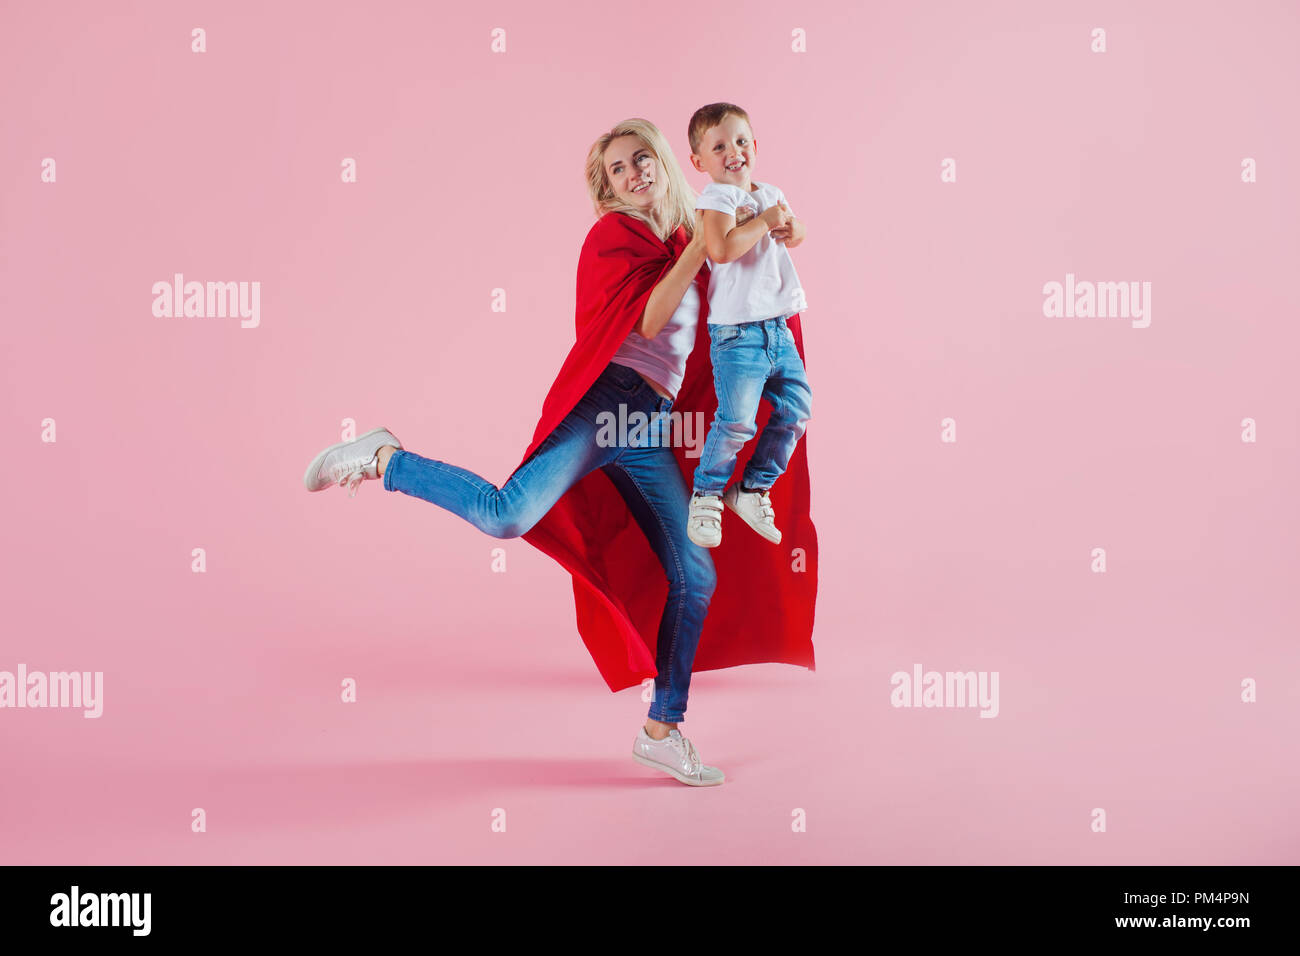 Mom is a superhero. Fun family, a young blond woman in a red Cape and her son jumps and takes off, pink background Stock Photo